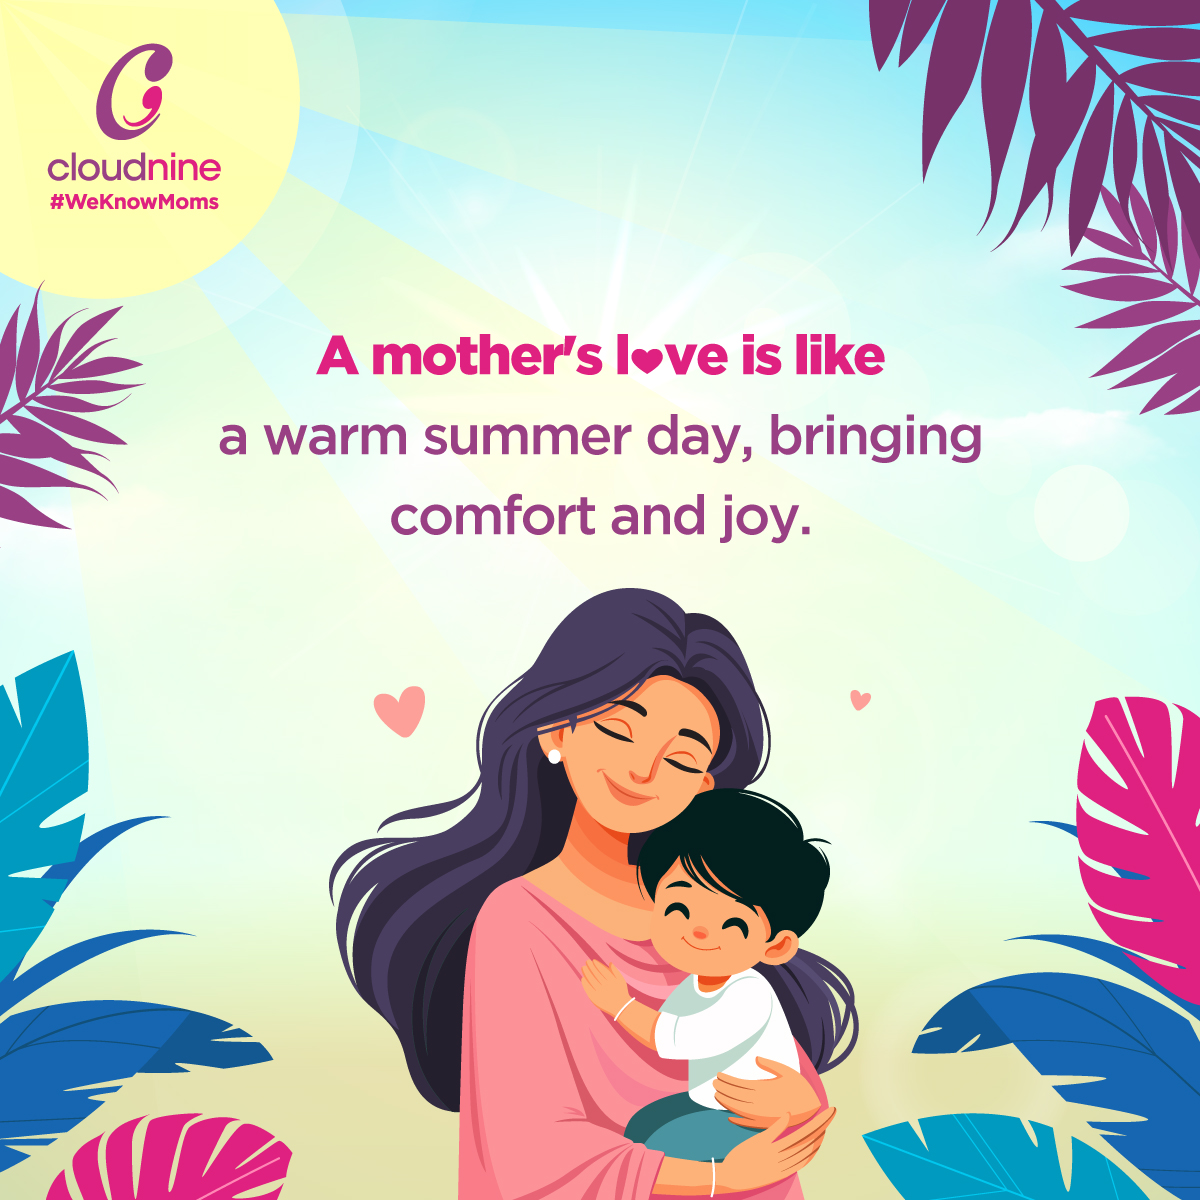 🤱 A mother's love is truly special. It has the ability to provide comfort and endless opportunities, warming our hearts with joy and gratitude. 👩‍👧‍👦 Drop a ❤️ if you agree. #weknowmoms #oncloudnine #MothersLove #WarmEmbrace #summerLove #HeartfeltConnection #SpecialBond